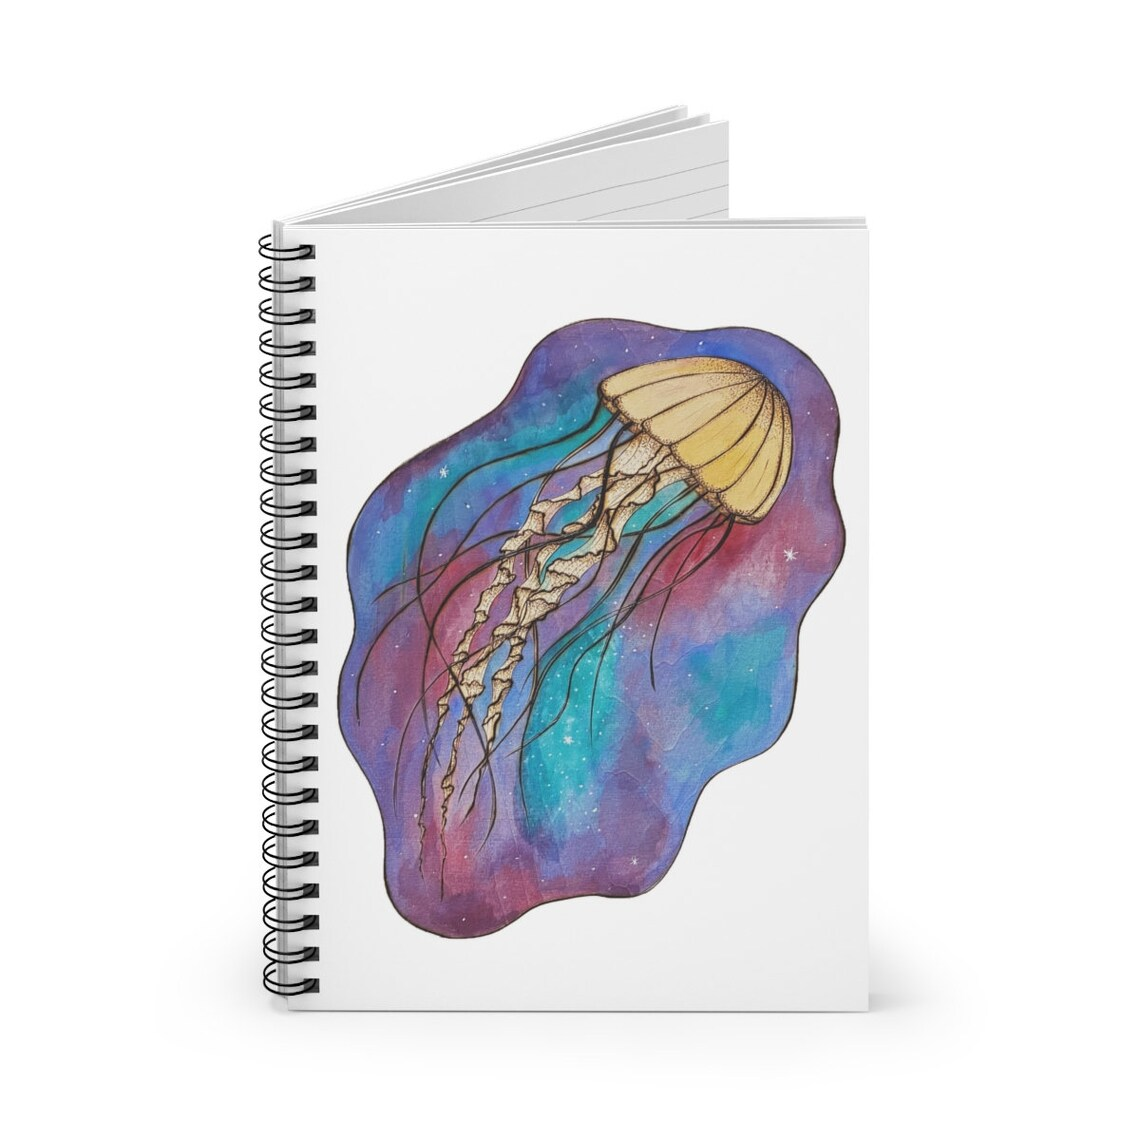 jellyfish journal - With the tees